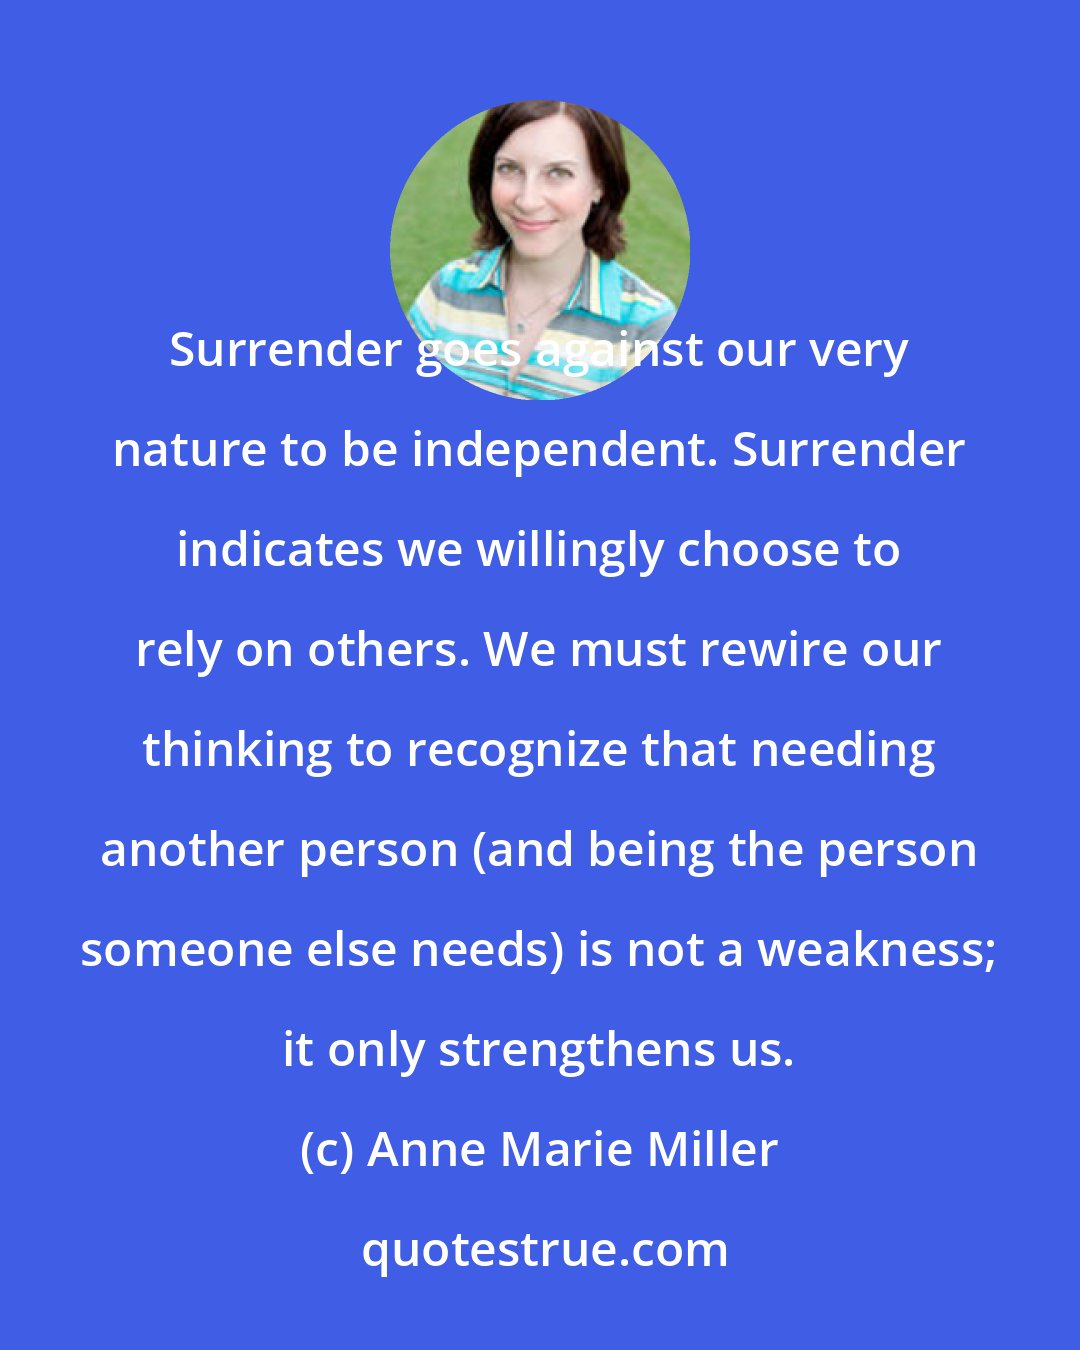 Anne Marie Miller: Surrender goes against our very nature to be independent. Surrender indicates we willingly choose to rely on others. We must rewire our thinking to recognize that needing another person (and being the person someone else needs) is not a weakness; it only strengthens us.